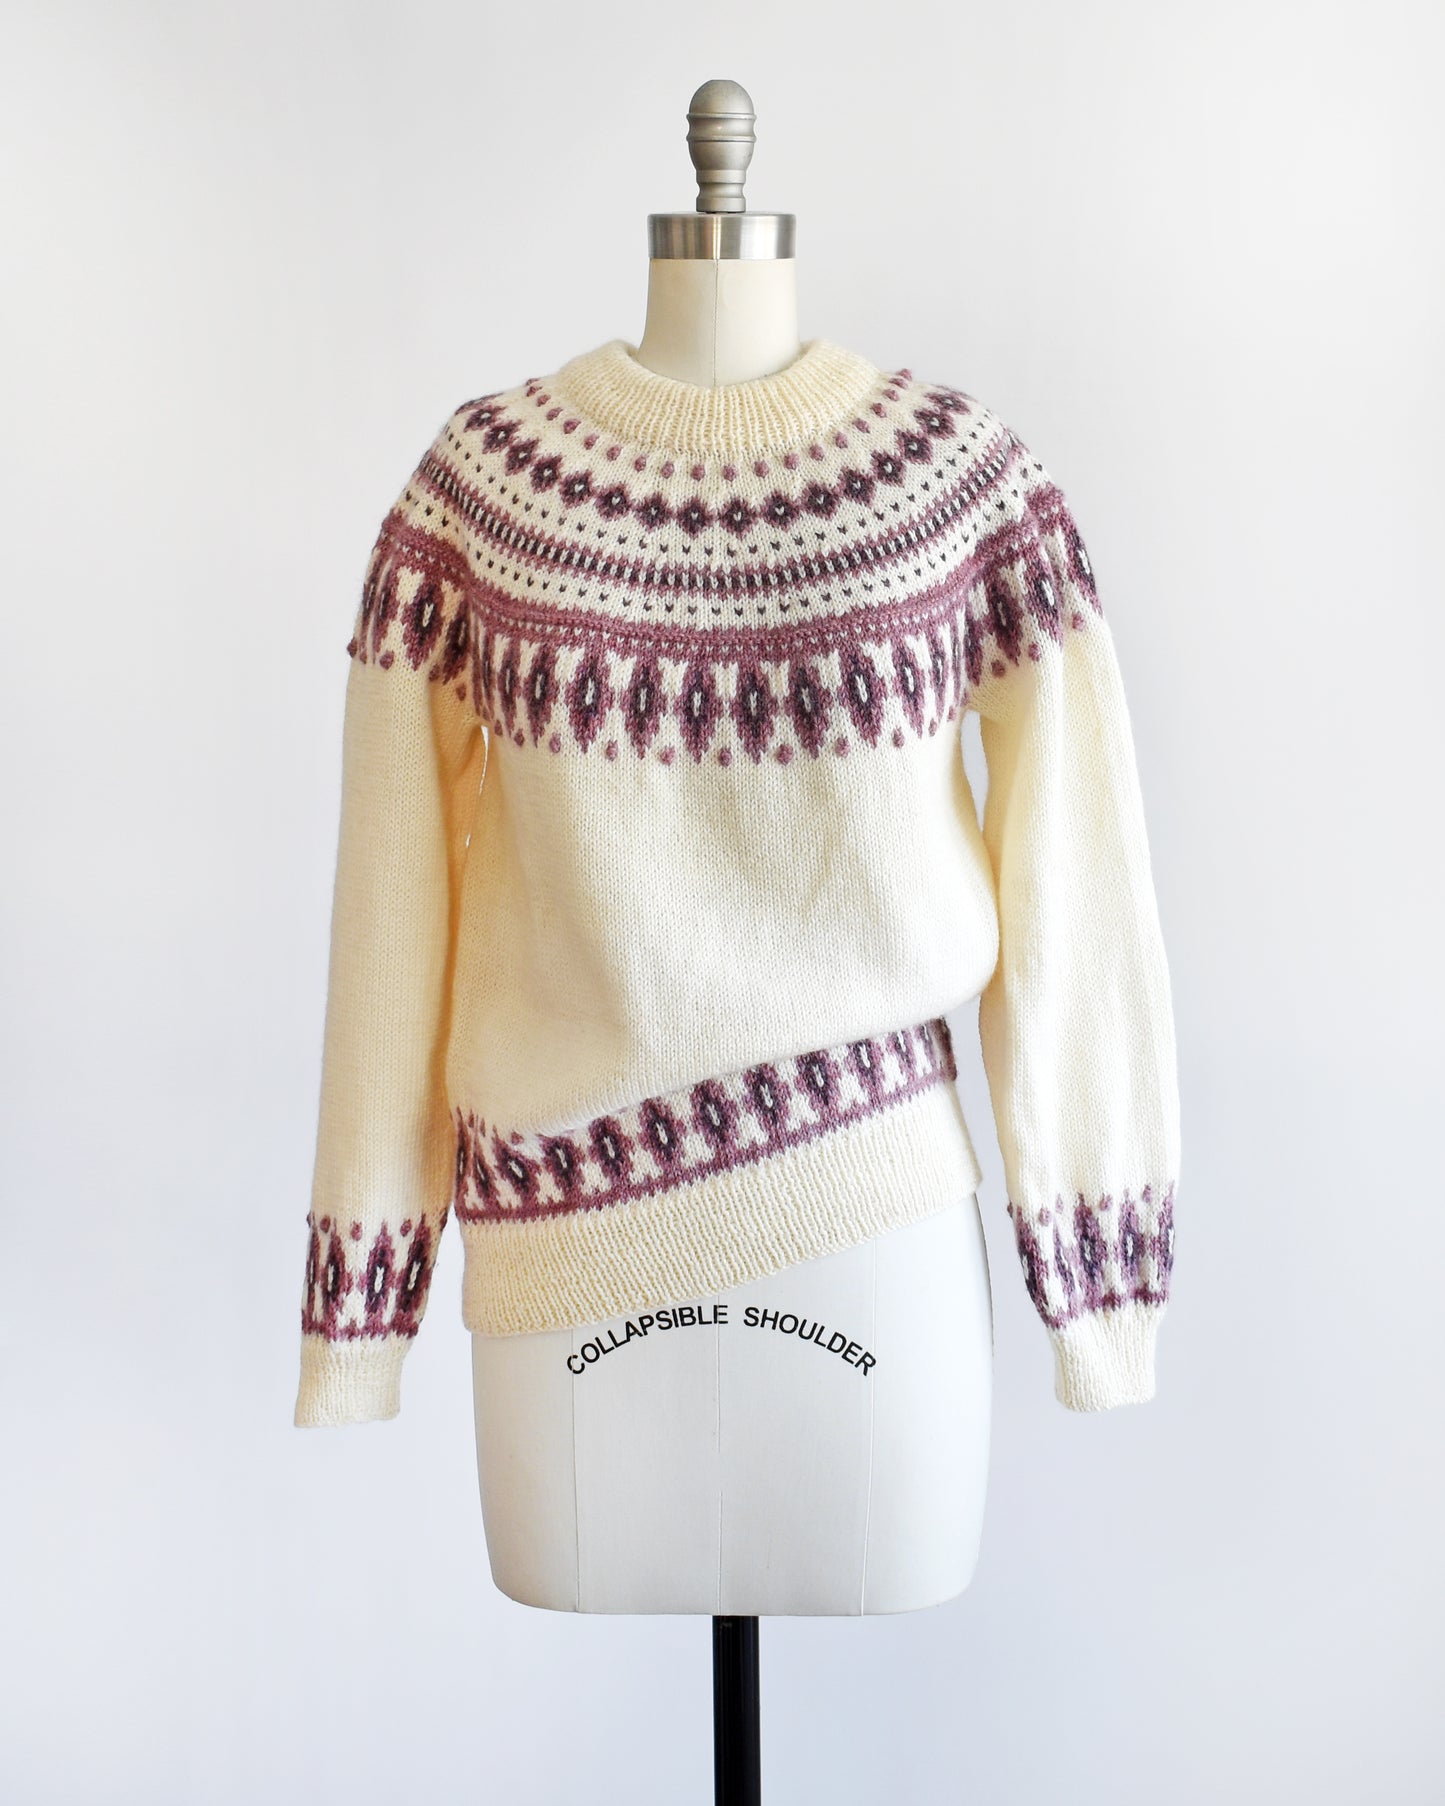 A vintage 1980s Dale of Norway cream wool sweater that has a purple Fair Isle pattern around the collar that's accented with matching purple nubby details. The sweater is slouched on one side